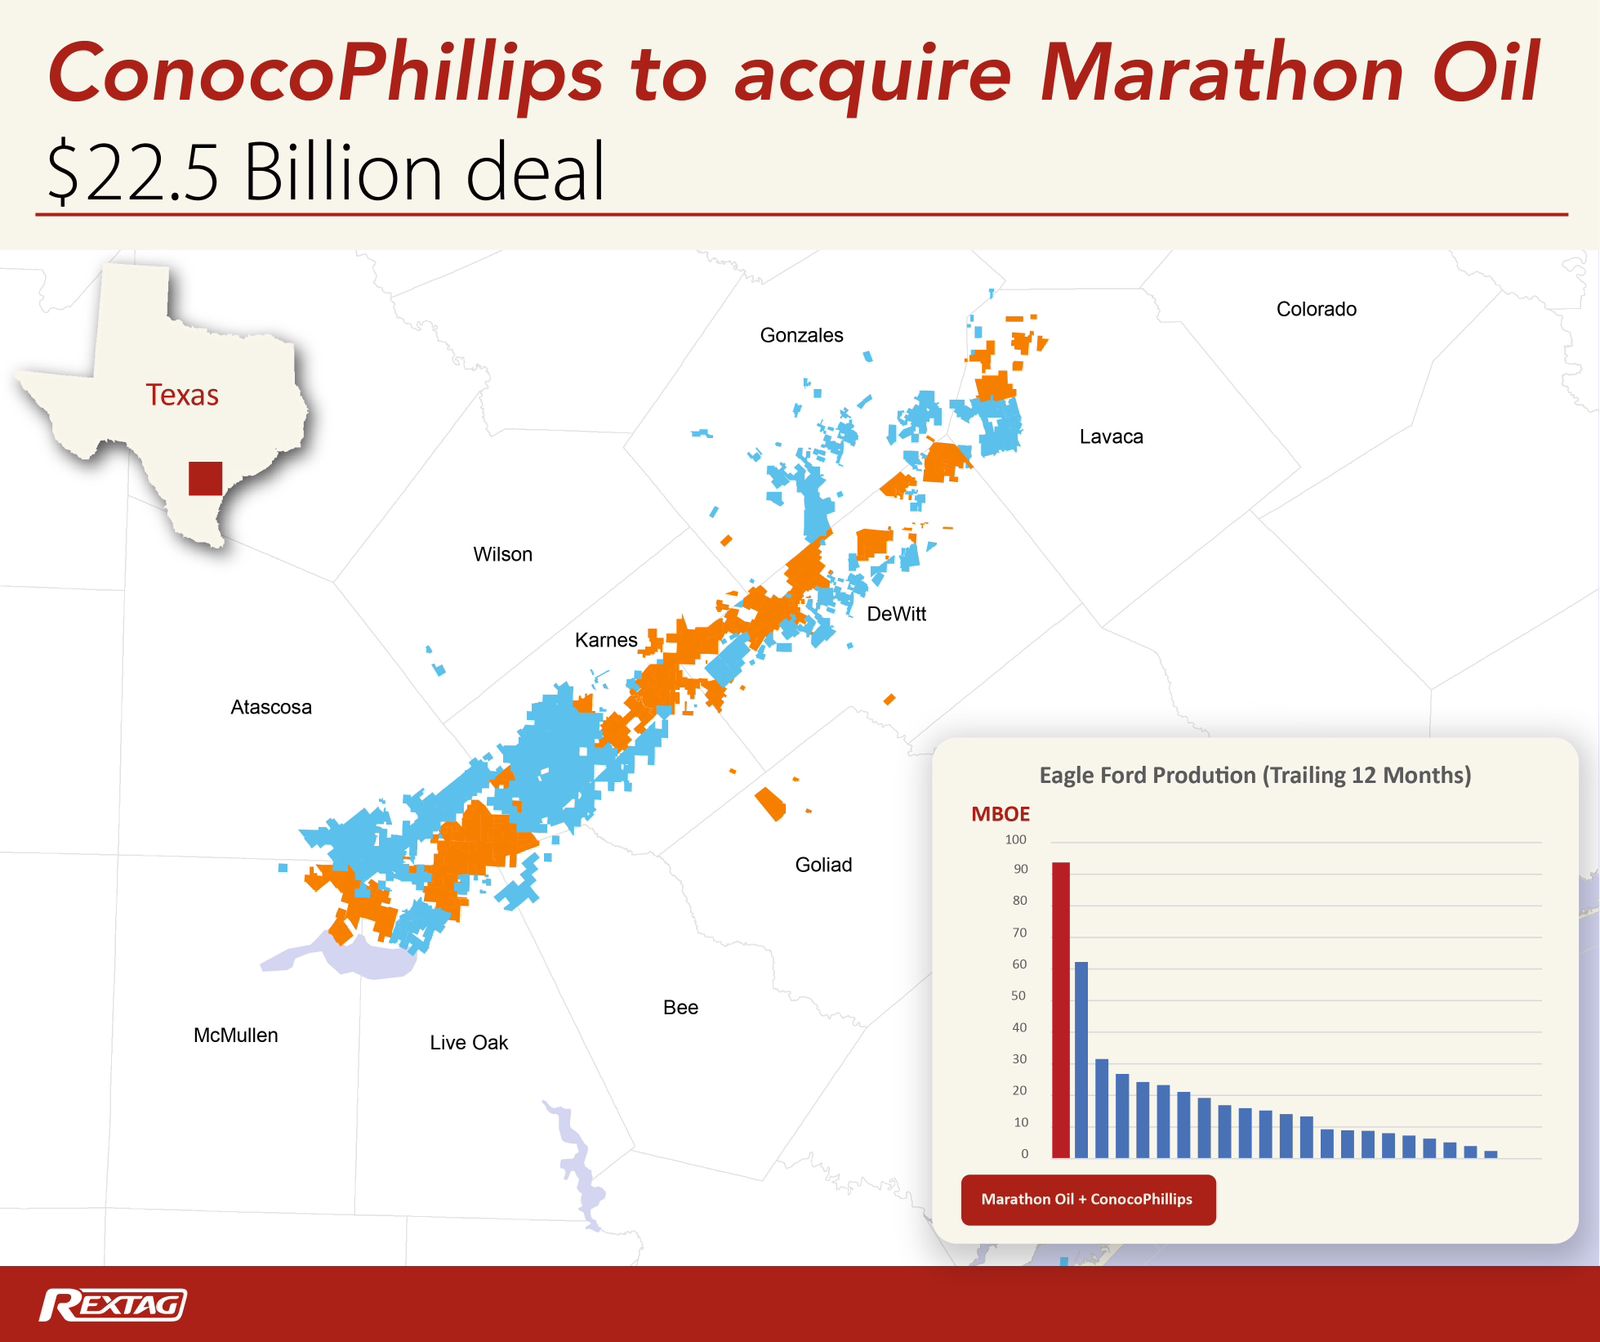 22-5-Billion-Shake-Up-ConocoPhillips-Acquires-Marathon-Oil-and-Gains-Major-Influence-in-the-Eagle-Ford 